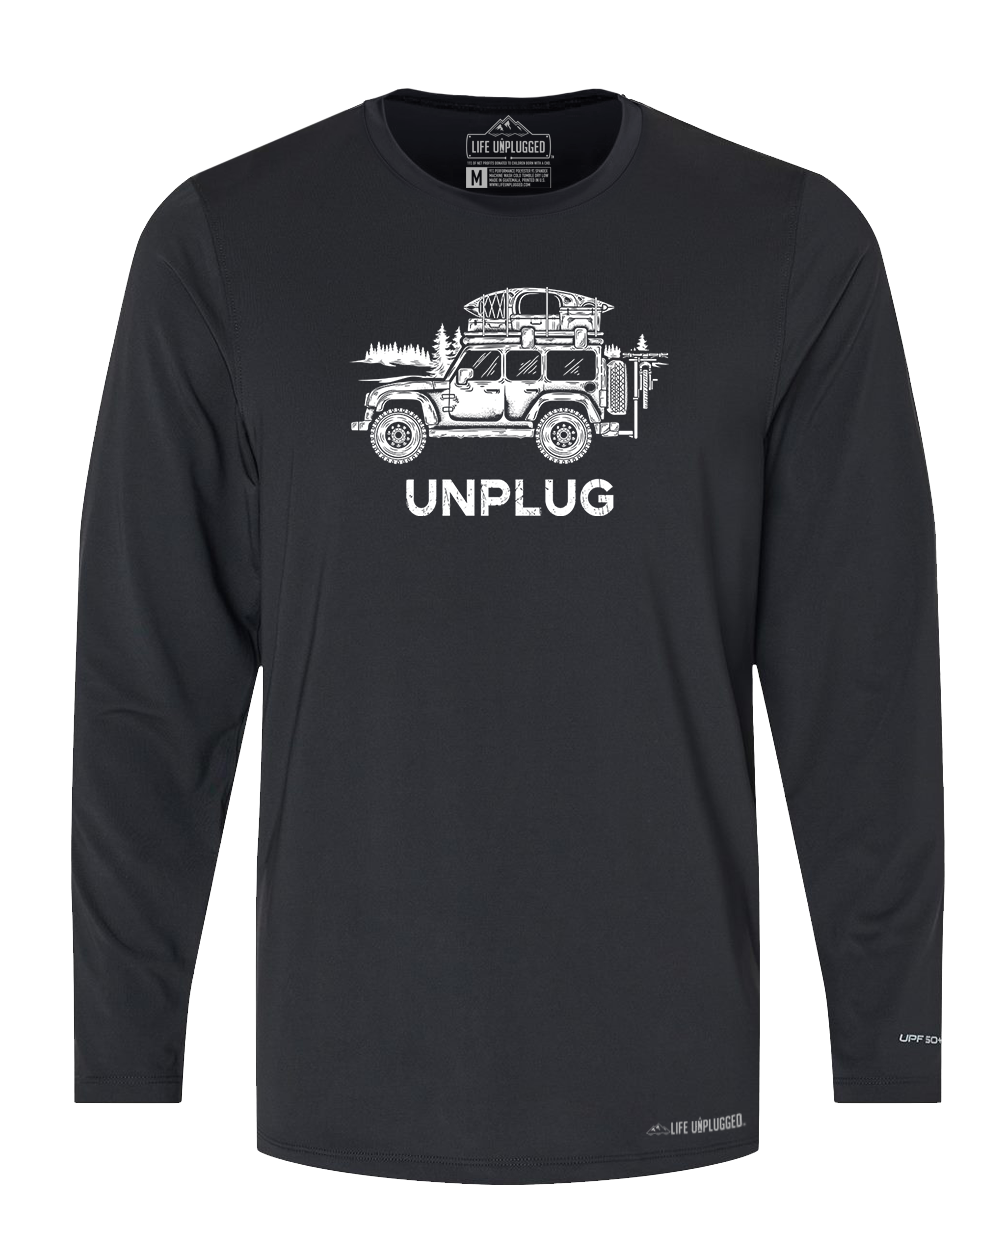 OFF-ROAD VEHICLE Poly/Spandex High Performance Long Sleeve with UPF 50+